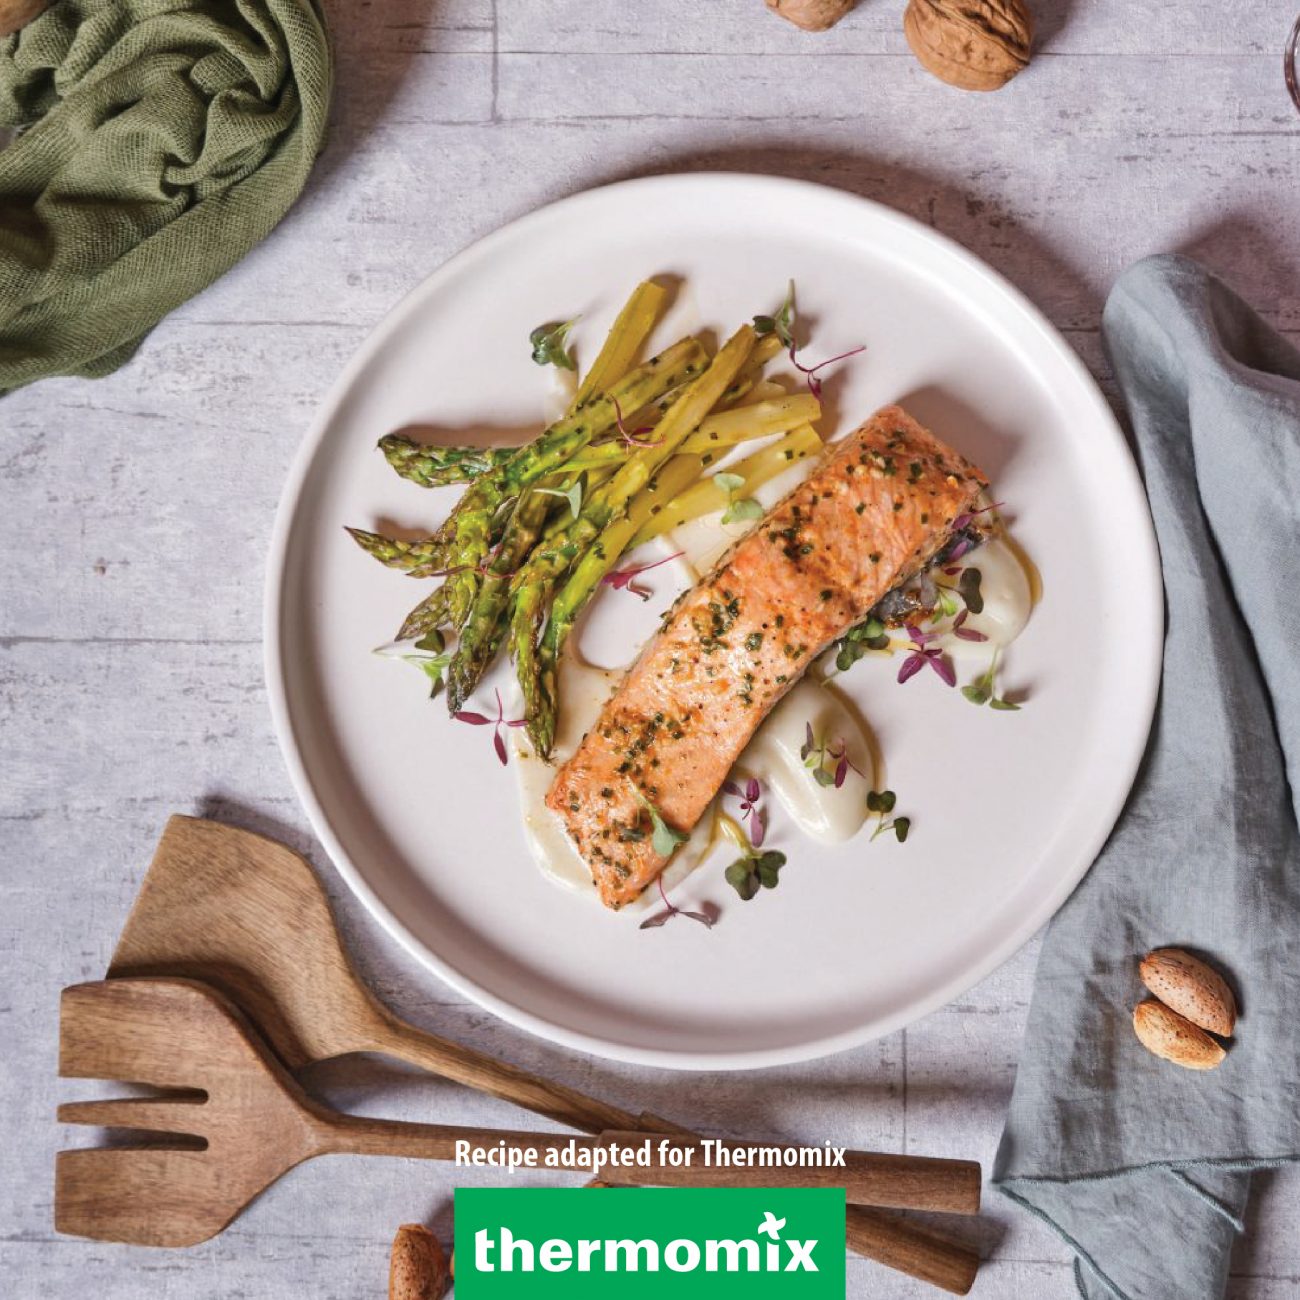 Grilled garlic salmon fillets with green asparagus and puree from cauliflower, flavored with cardamom and lime – Thermomix